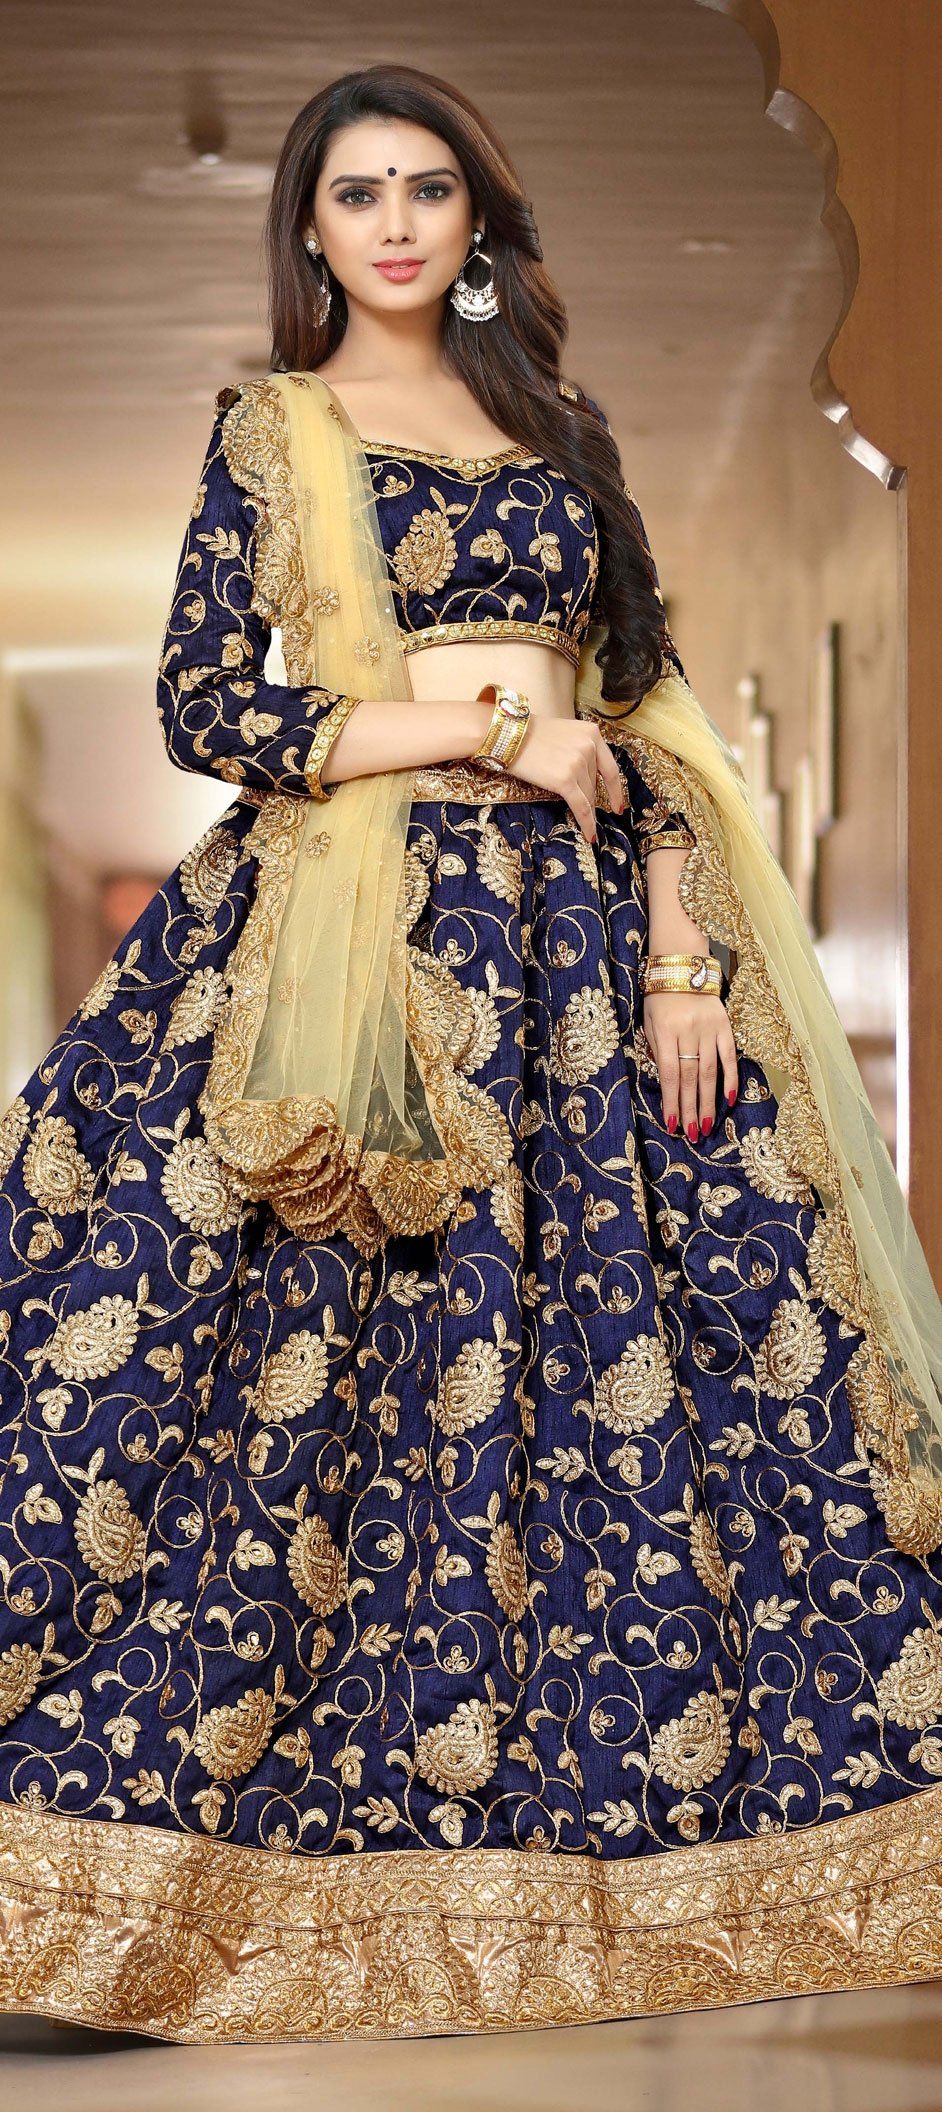 Blue color party wear lehenga - Indian Clothing in Denver, CO, Aurora, CO, Boulder, CO, Fort Collins, CO, Colorado Springs, CO, Parker, CO, Highlands Ranch, CO, Cherry Creek, CO, Centennial, CO, and Longmont, CO. Nationwide shipping USA - India Fashion X